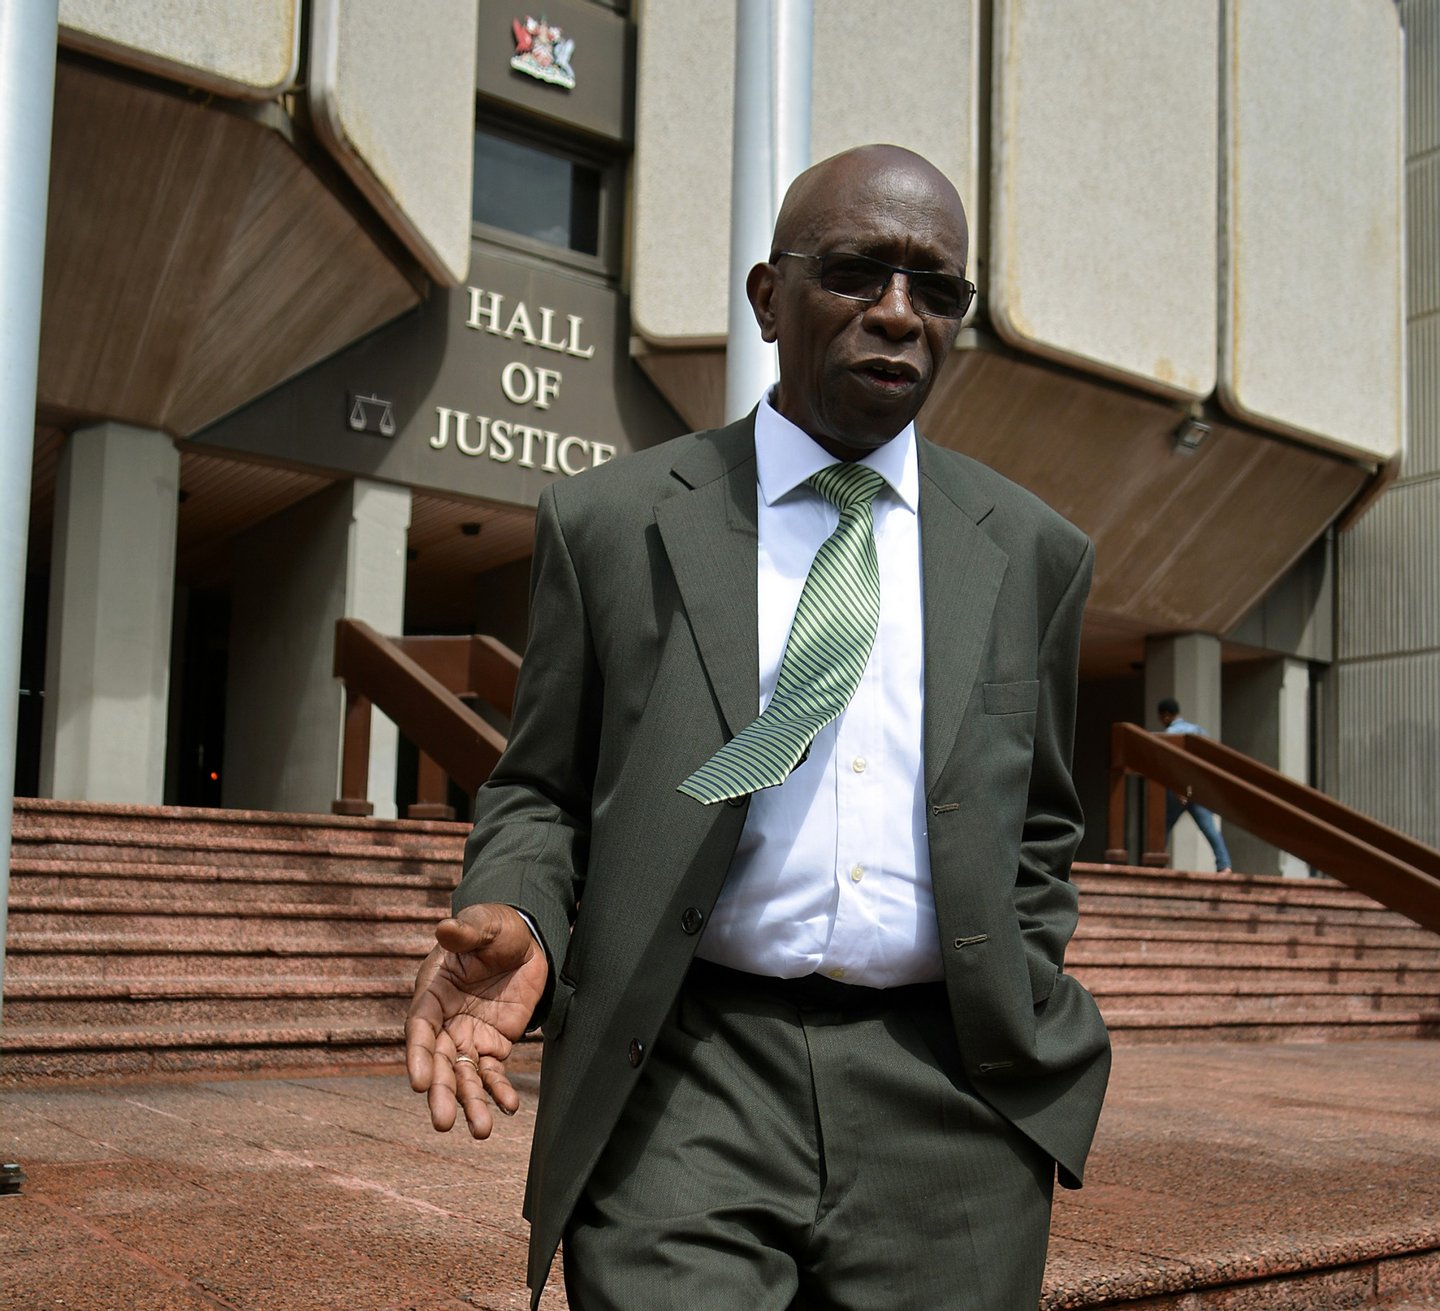 Former FIFA vice-president Jack Warner talks with journalists outside the Hall of Justice in Port-of-Spain, Trinidad, on December 4, 2015, following the hearing of his legal challenge to avert being extradited to the United States where he has been indicted on bribery, racketeering and money laundering charges. AFP photo/ALVA VIARRUEL / AFP / ALVA VIARRUEL (Photo credit should read ALVA VIARRUEL/AFP/Getty Images)